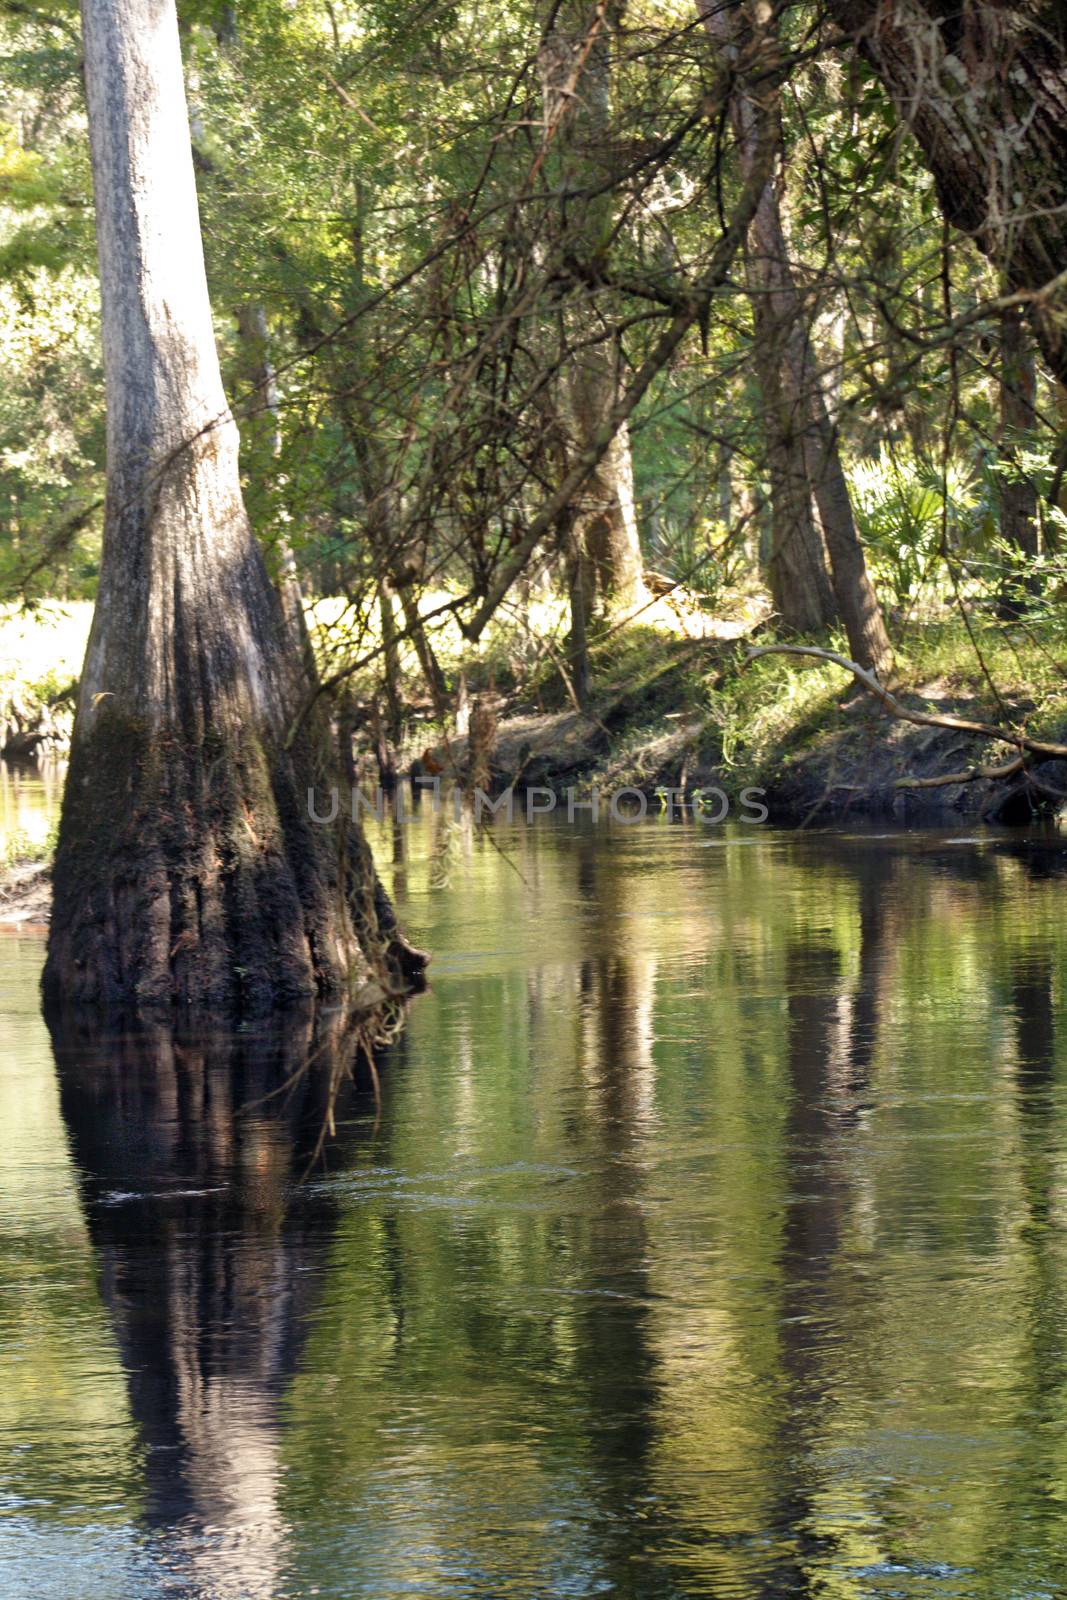 A large cypress tree rises from a small river in a tropical forest.